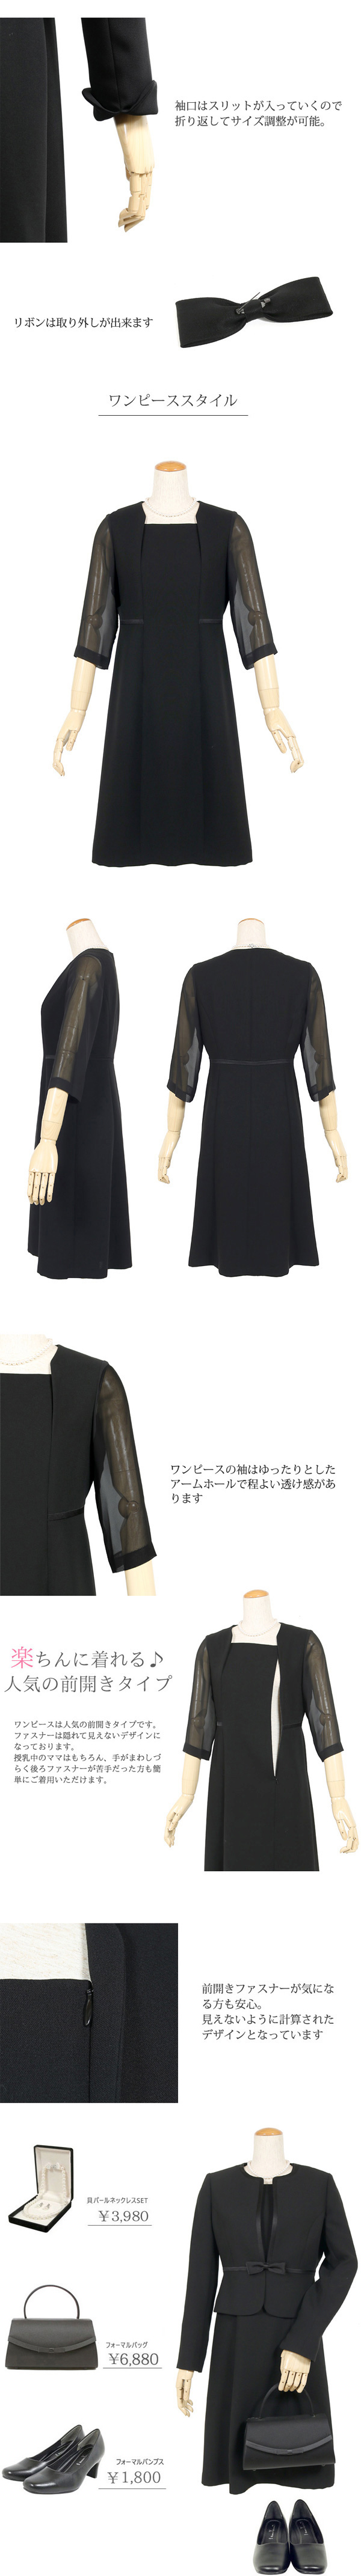  mourning dress black formal . clothes lady's 